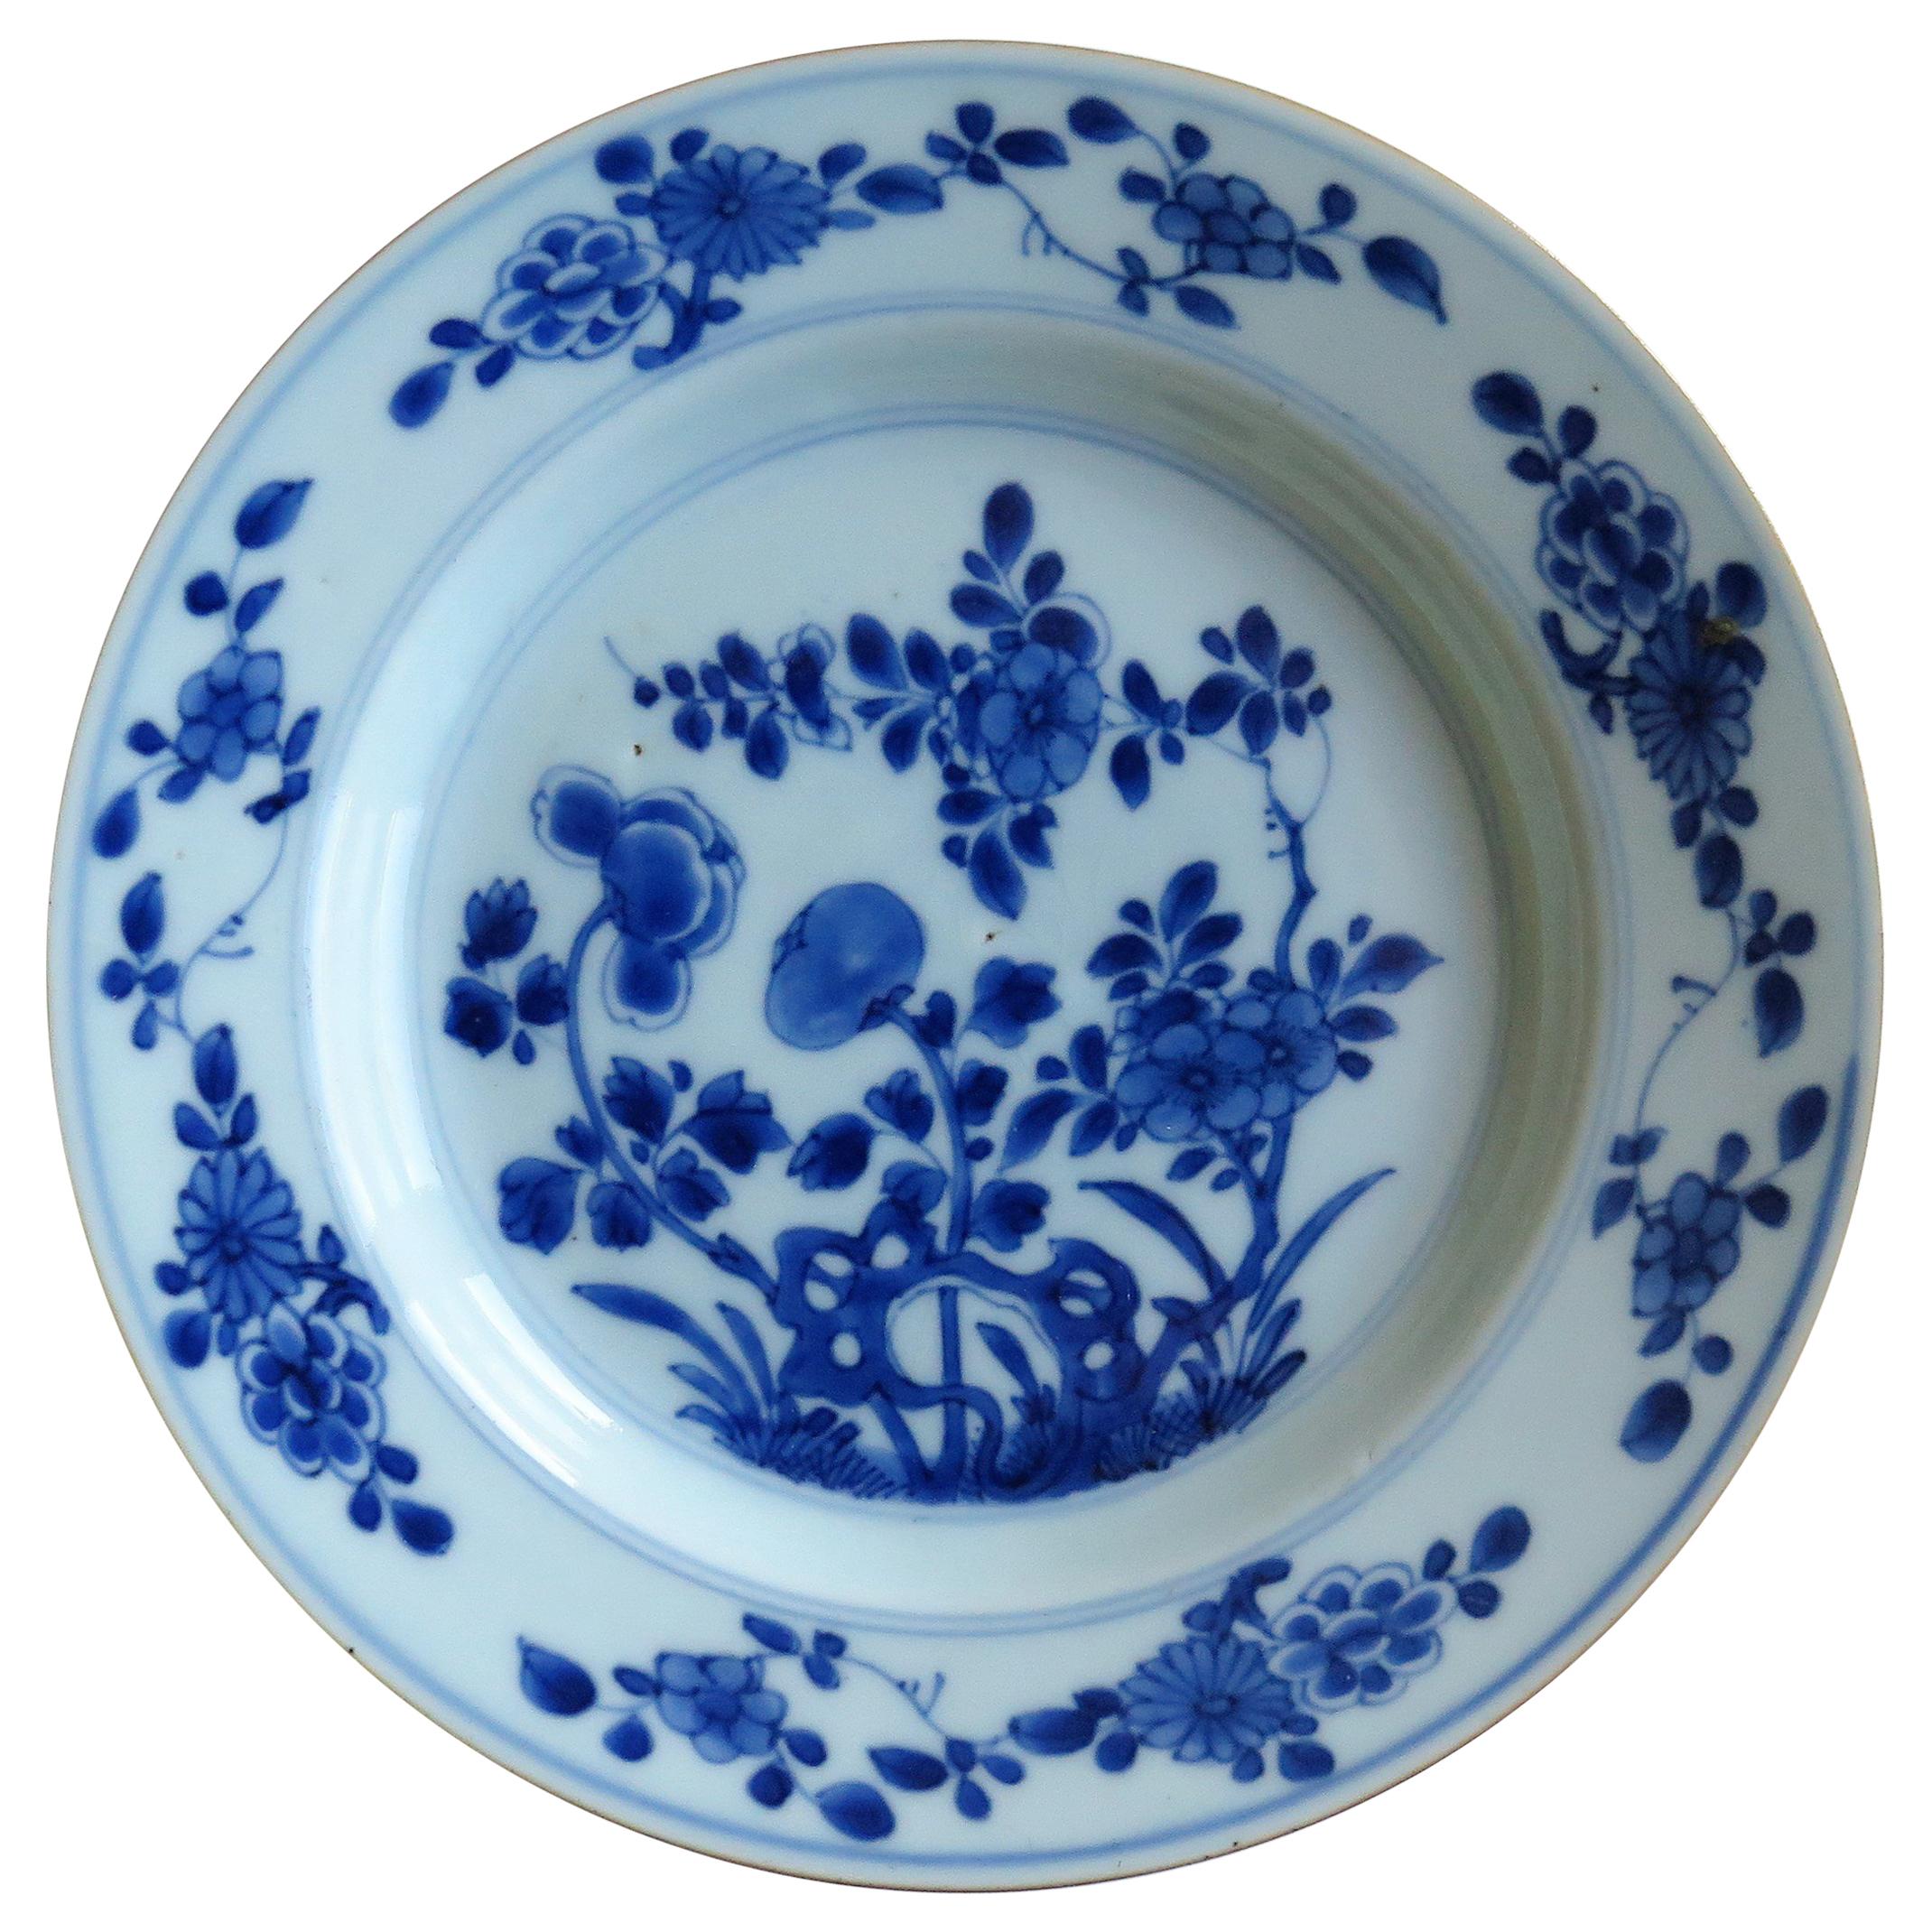 Early 18th Century Chinese Porcelain Blue and White Plate or Dish, Qing Ca 1730